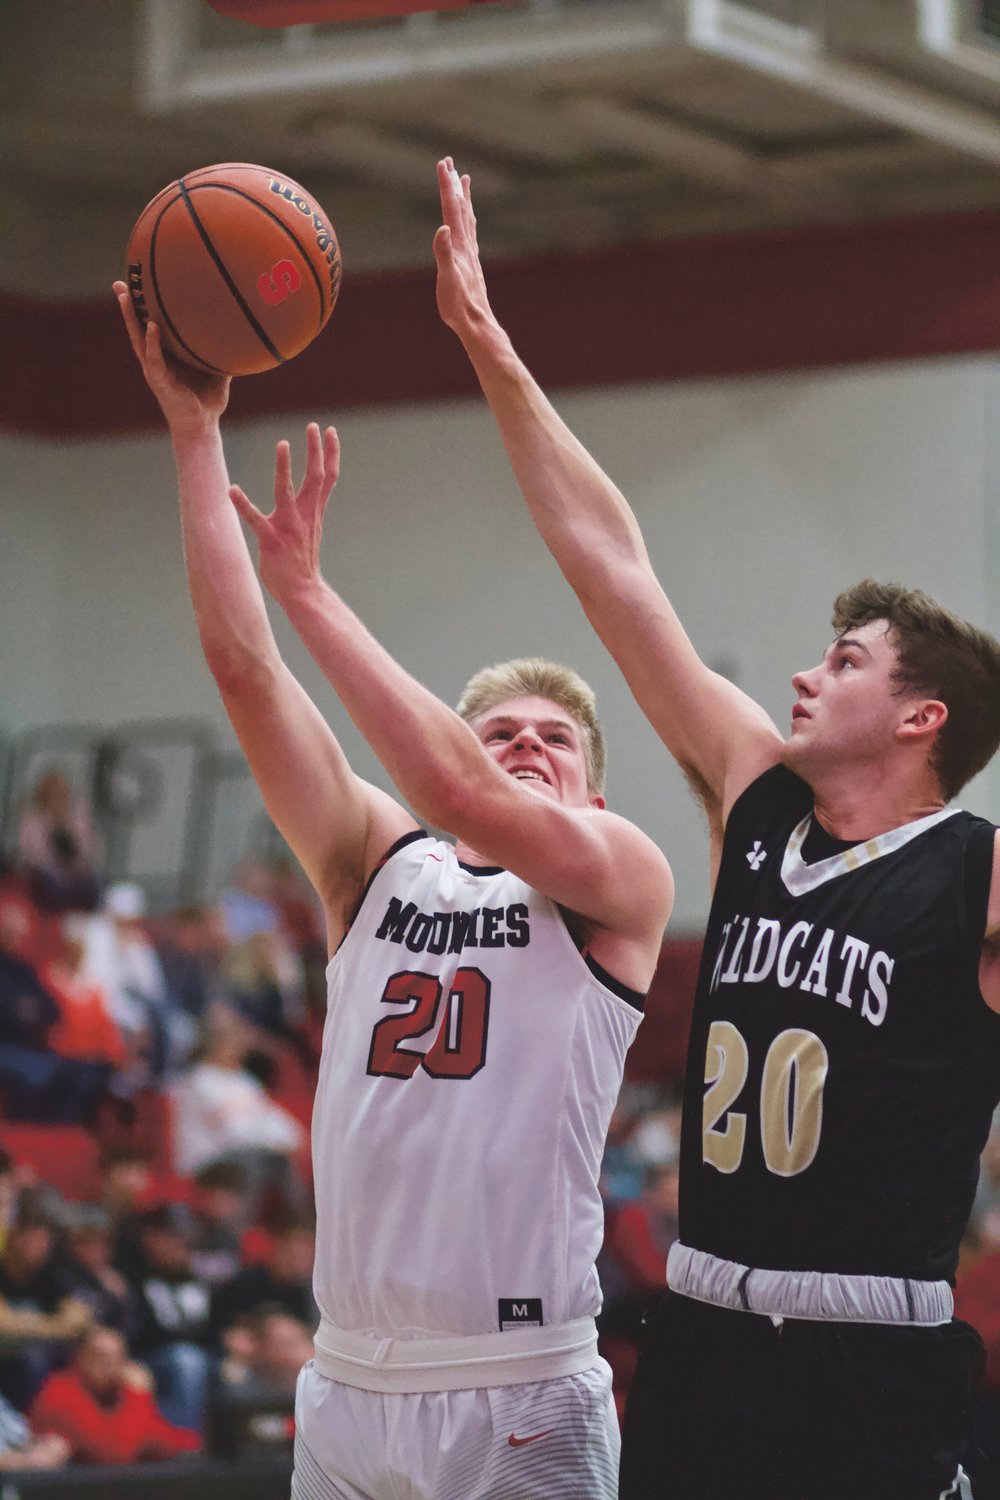 Southmont freshman Carson Chadd had eight points and six rebounds in his Mountie debut on Tuesday.